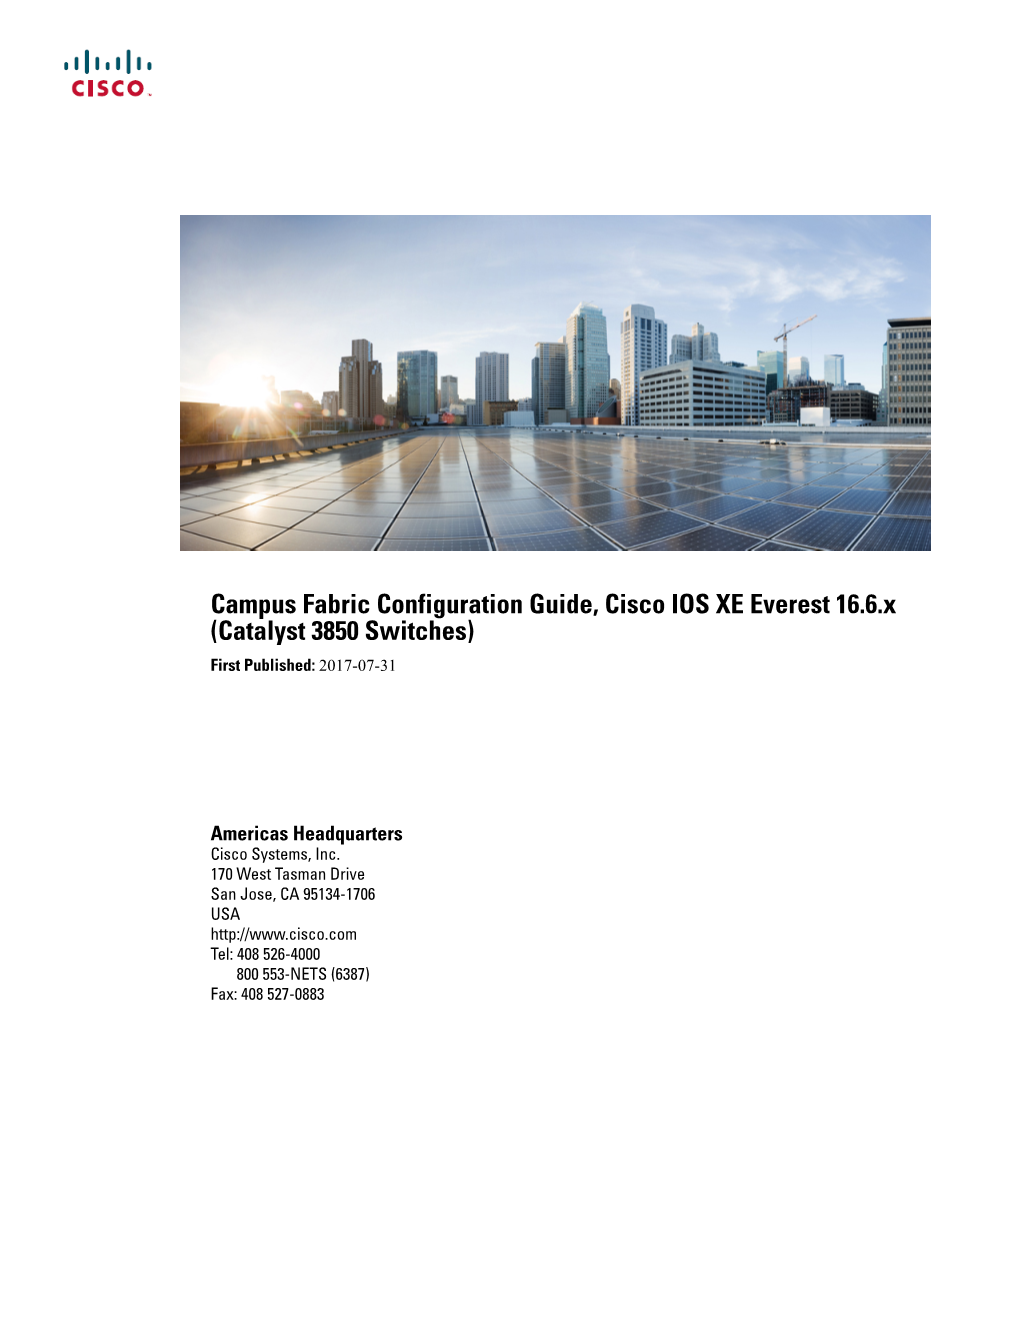 Campus Fabric Configuration Guide, Cisco IOS XE Everest 16.6.X (Catalyst 3850 Switches) First Published: 2017-07-31